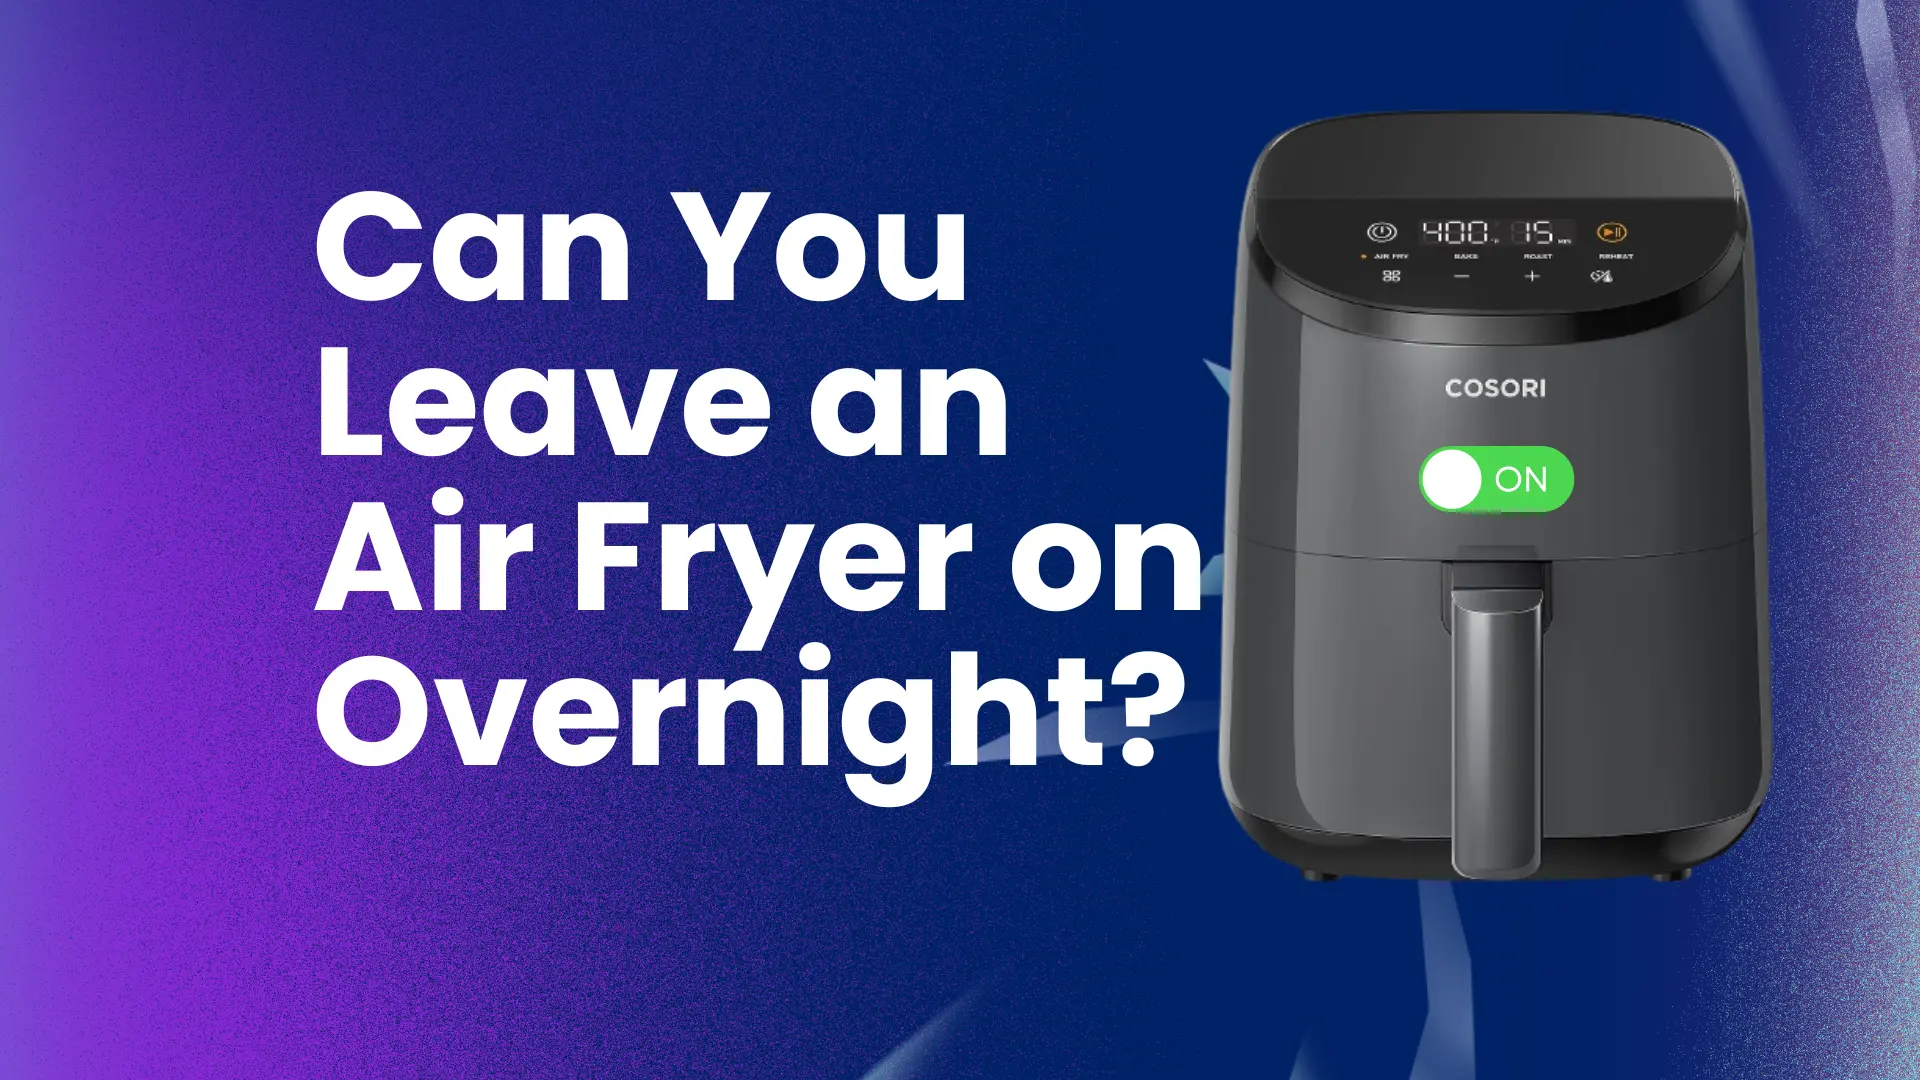 Can You Leave an Air Fryer on Overnight